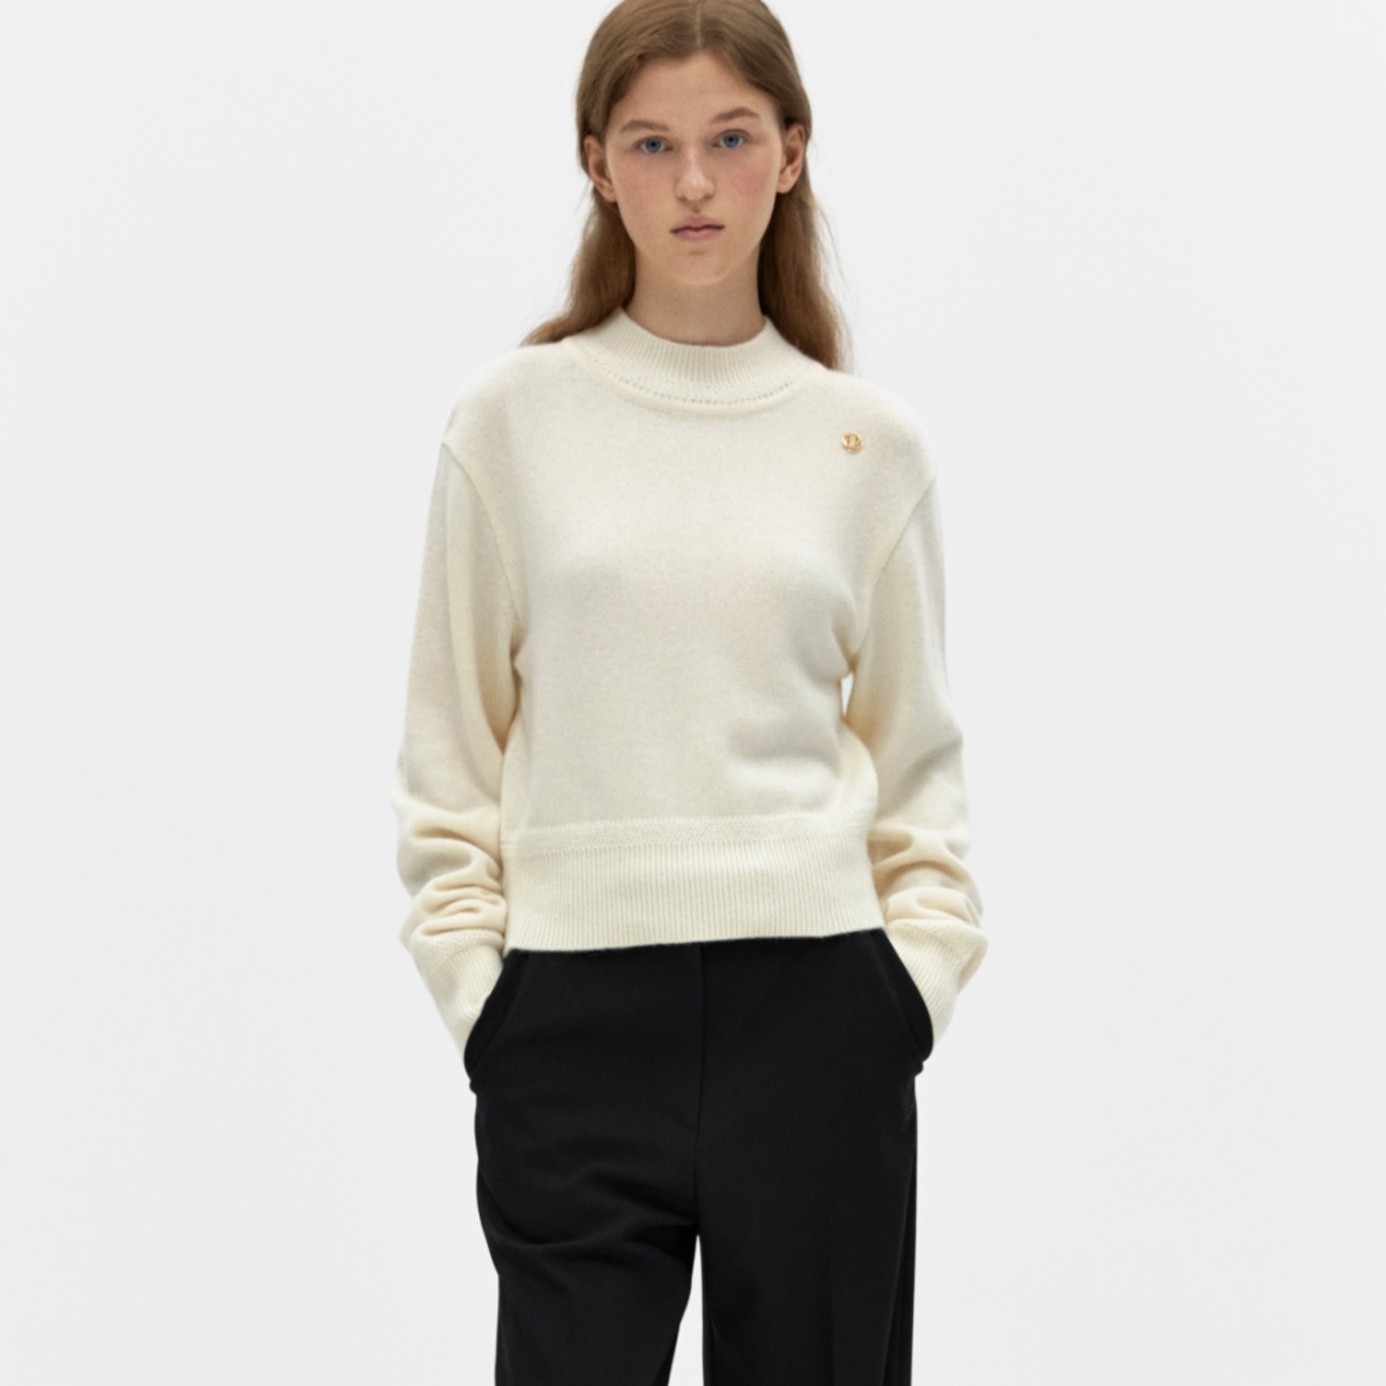 depound-charming pullover - ivory